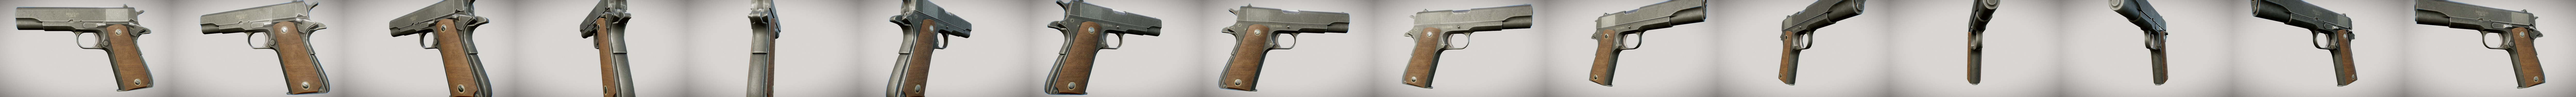 Colt M1911 Download Free 3d Model By Ole Gunnar Isager Frenchbaguette 26adfd6 - games with 1911 in roblox that you can play